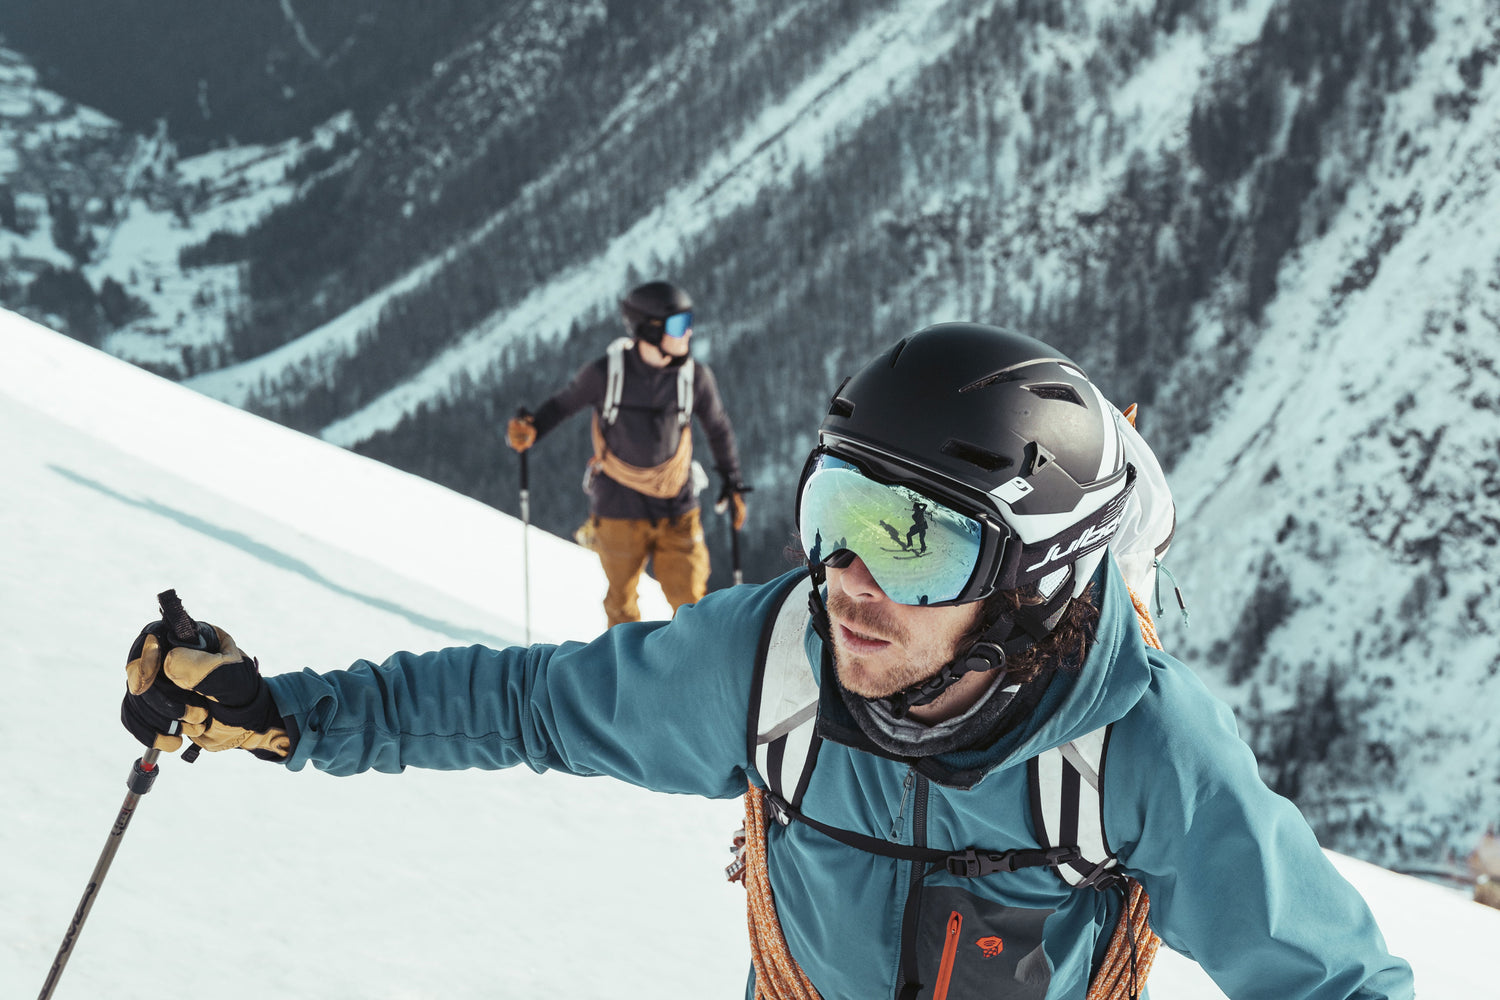 Julbo Aerospace is Perfect for Backcountry Skiing